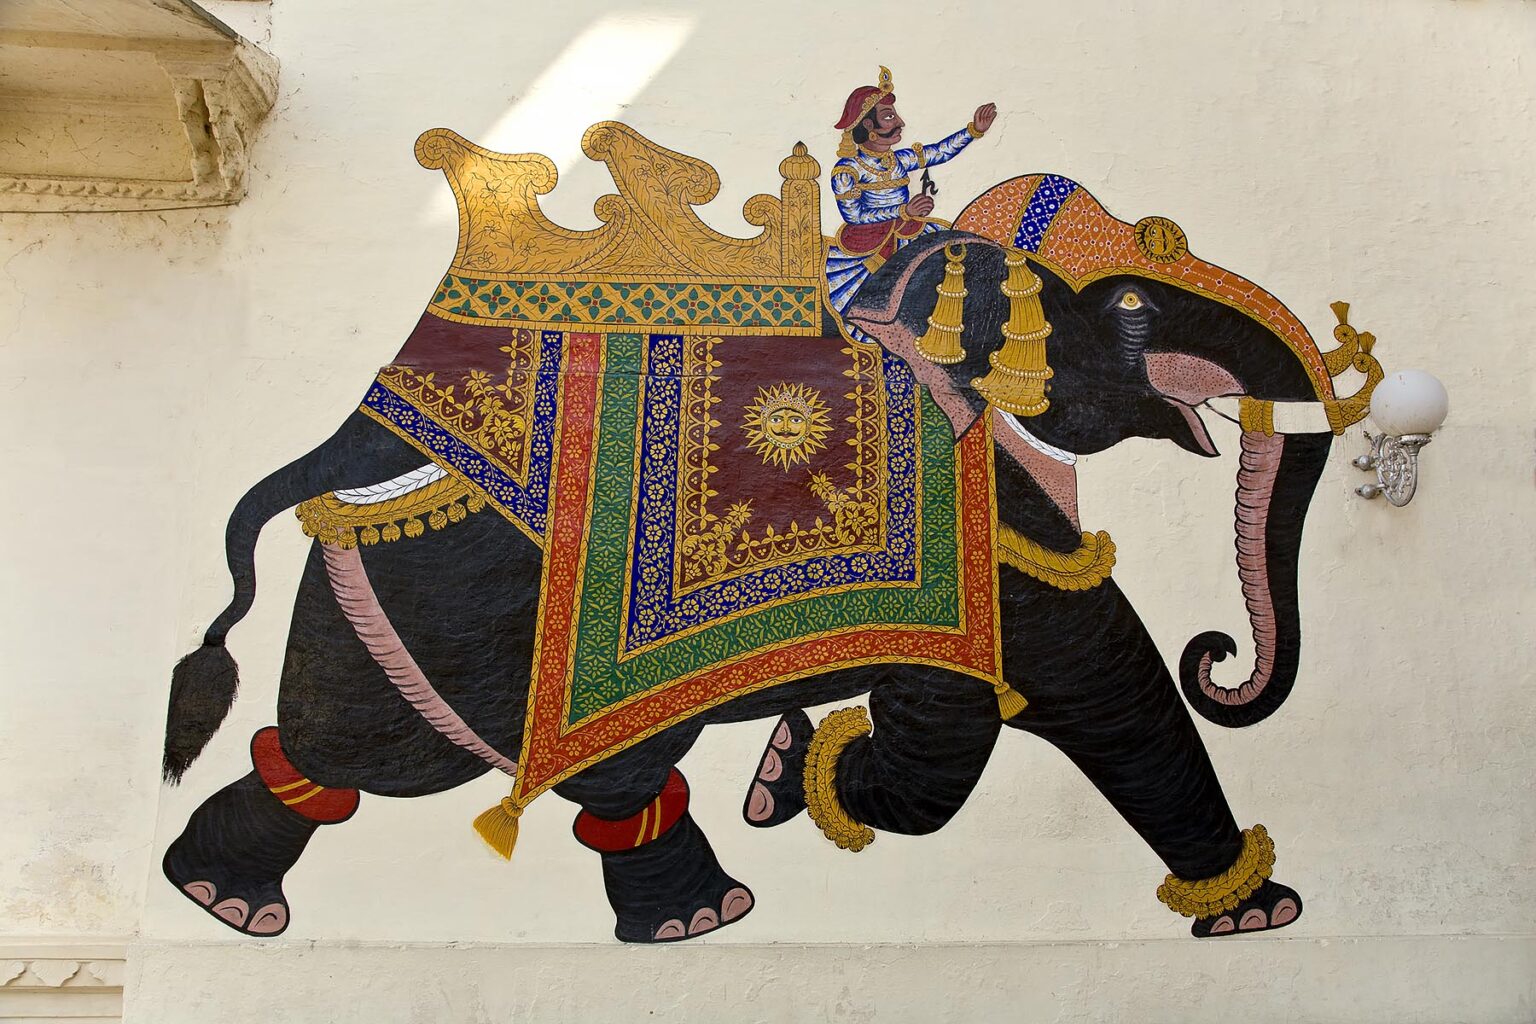 A painting of an ELEPHANT and RIDER of the wall of the CITY PALACE of UDAIPUR - RAJASTHAN, INDIA